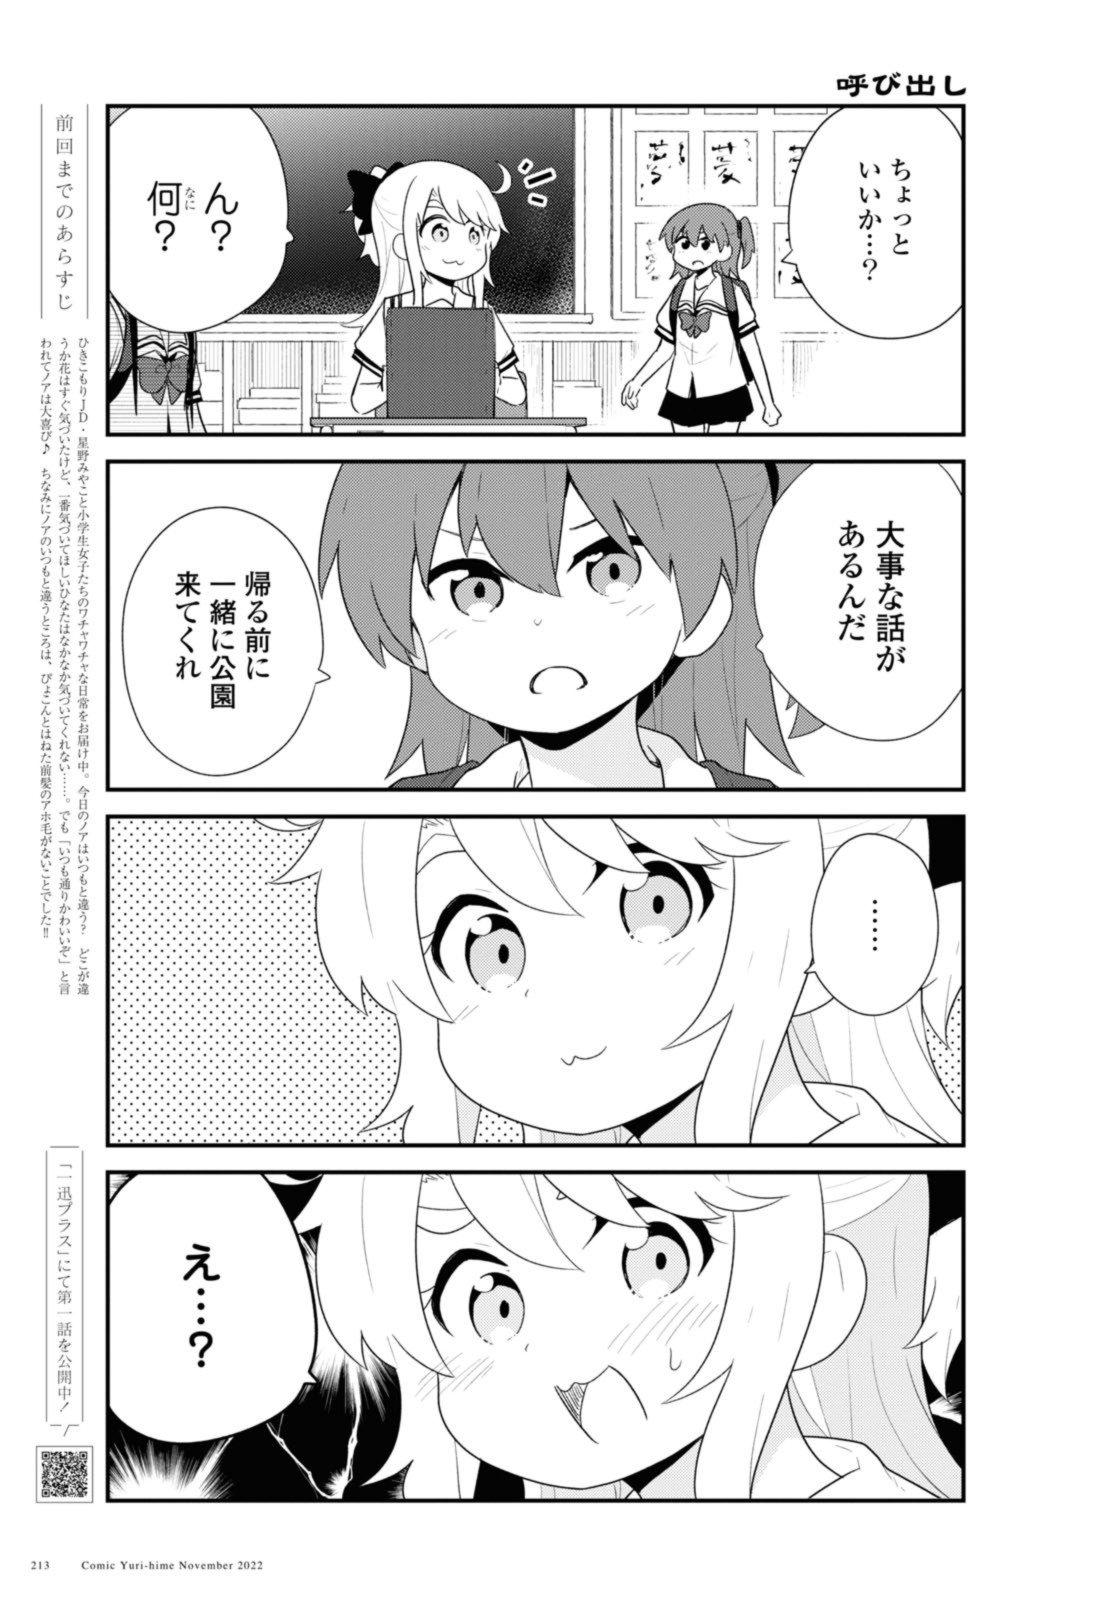 Wataten! An Angel Flew Down to Me 私に天使が舞い降りた！ 第99話 - Page 1